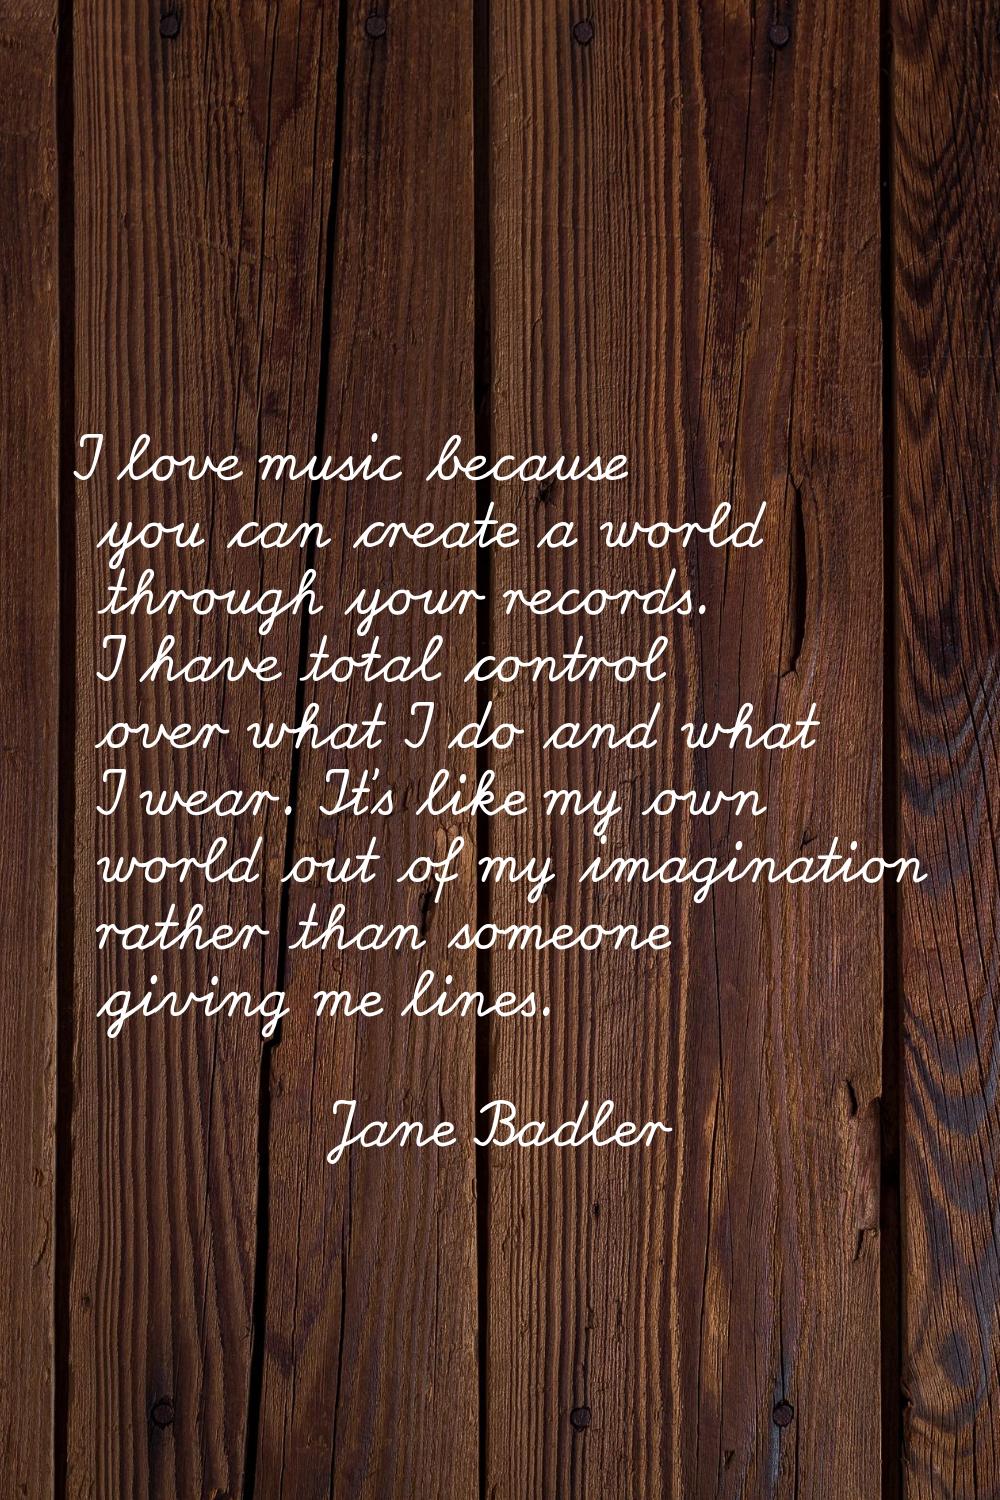 I love music because you can create a world through your records. I have total control over what I 